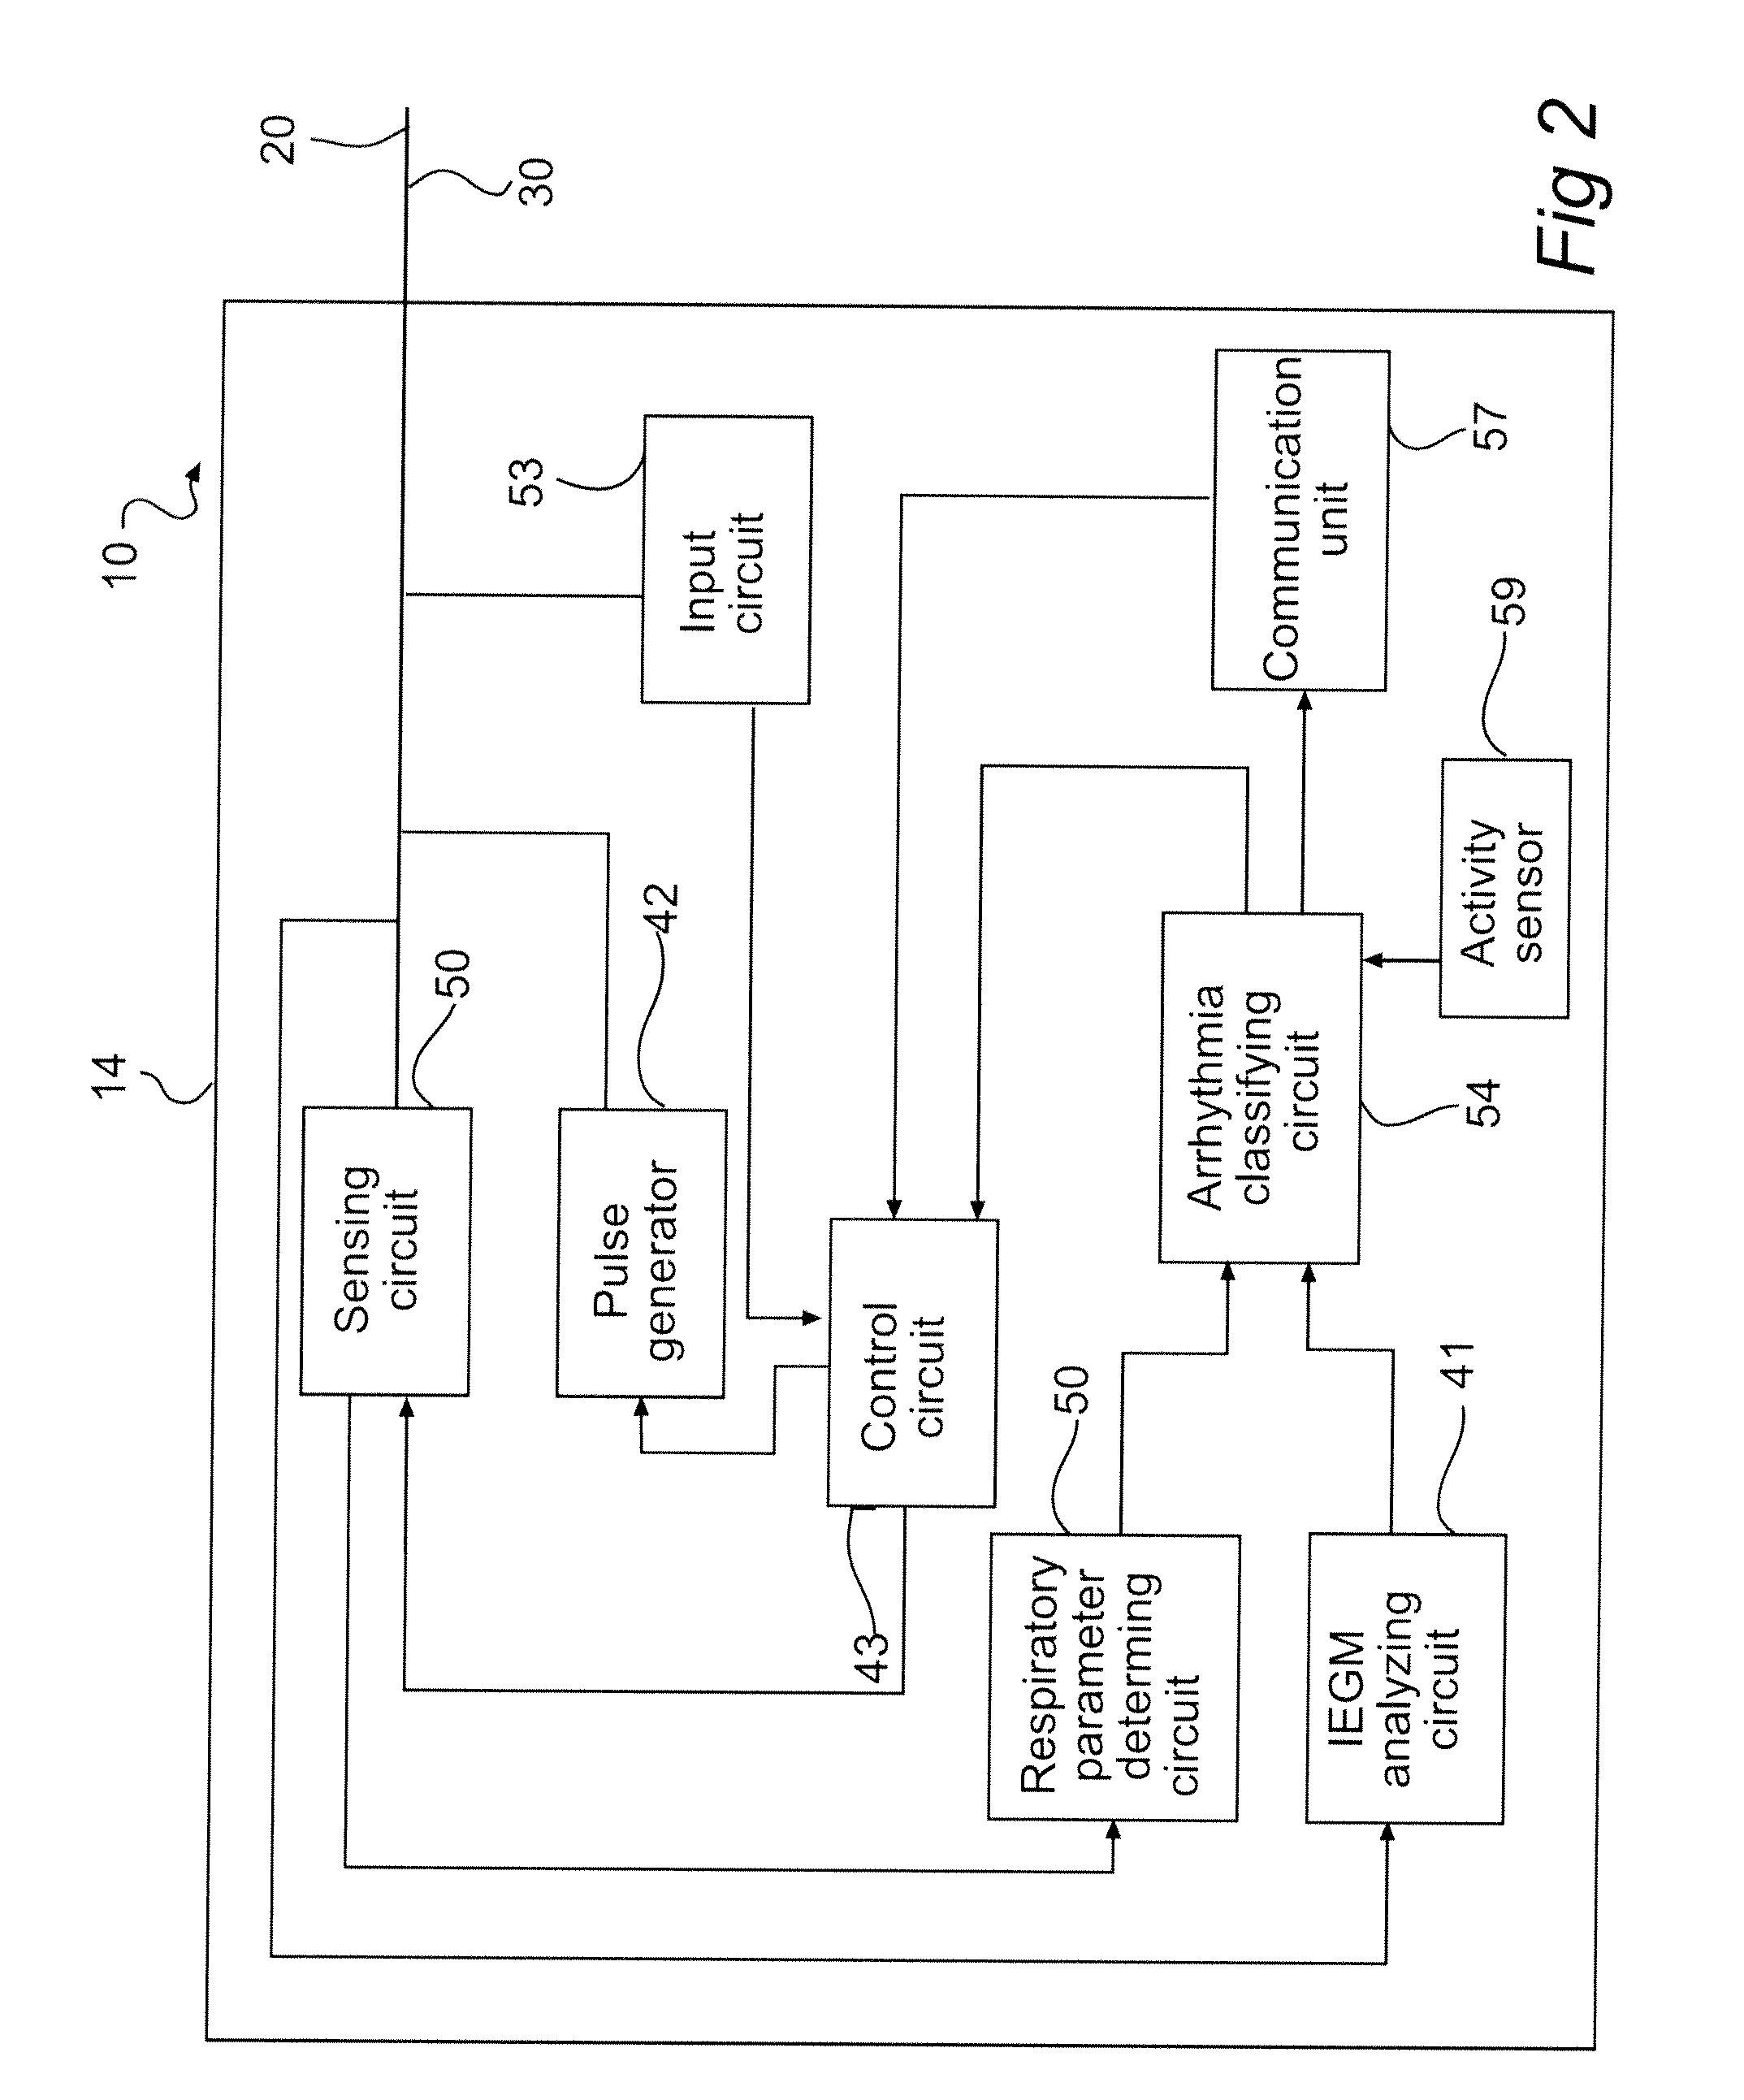 Implantable medical device and method for classifying arrhythmia events